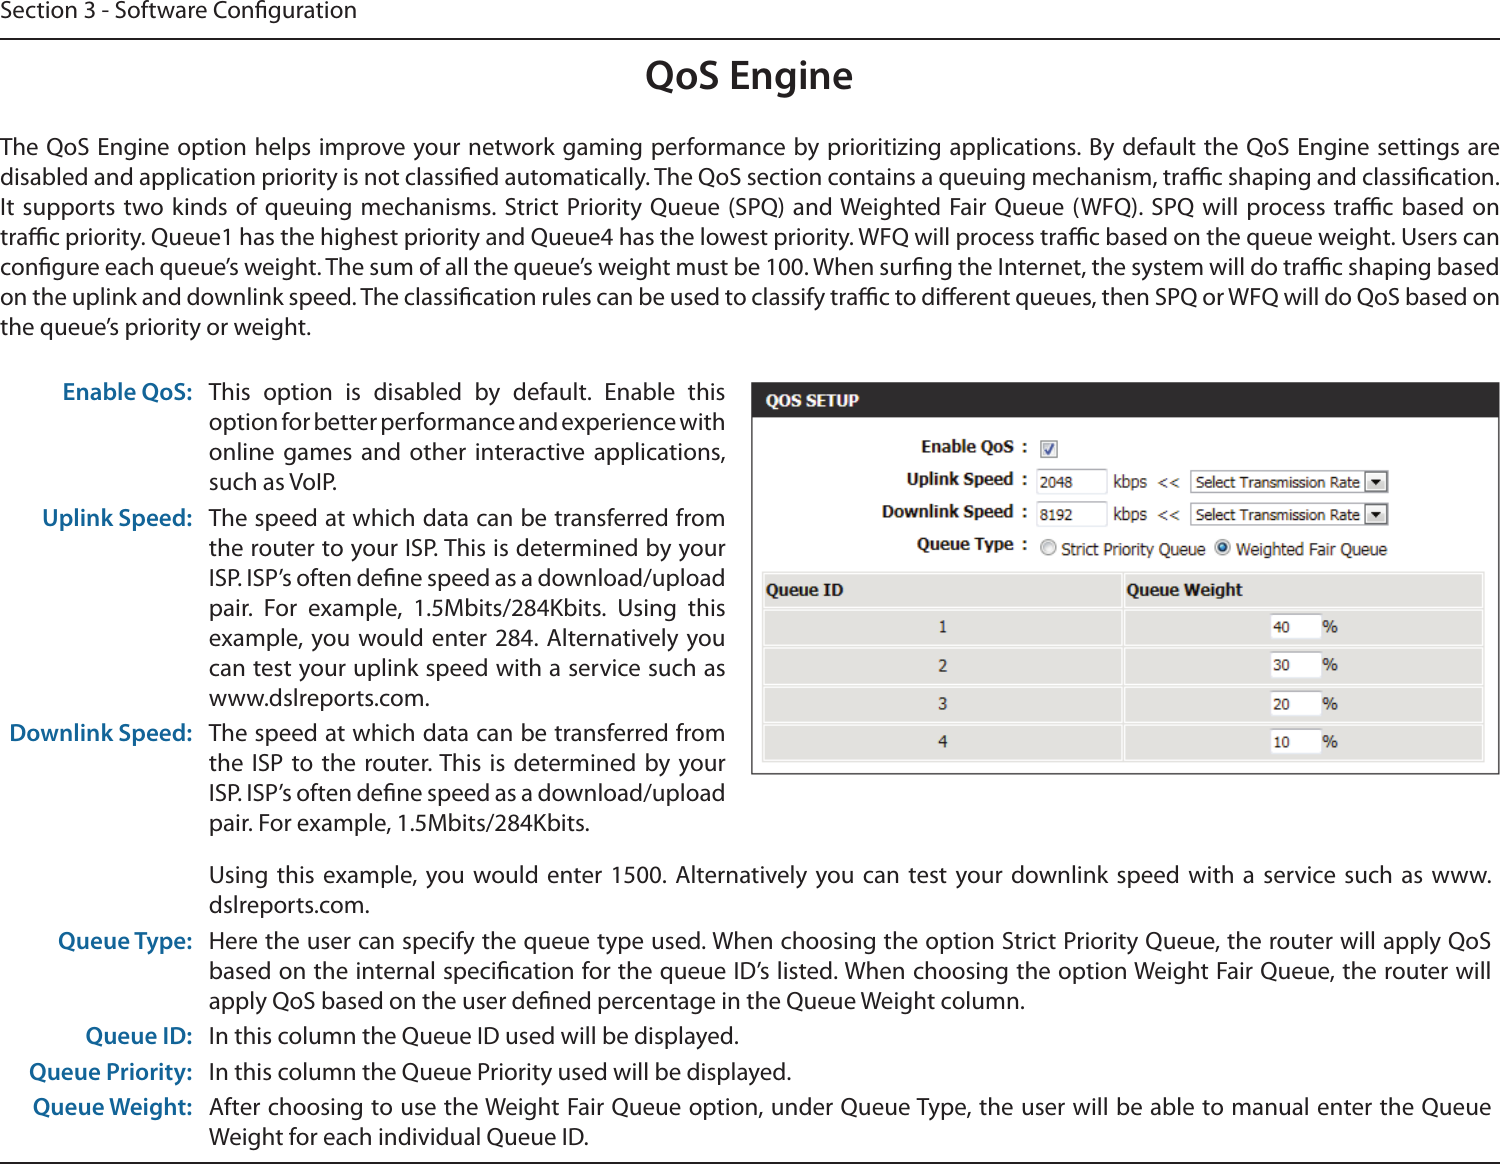 Section 3 - Software CongurationQoS EngineThe QoS Engine option helps improve your network gaming performance by prioritizing applications. By default the QoS Engine settings are disabled and application priority is not classied automatically. The QoS section contains a queuing mechanism, trac shaping and classication. It  supports  two kinds of  queuing  mechanisms. Strict Priority Queue (SPQ)  and Weighted Fair Queue (WFQ). SPQ  will  process trac based on trac priority. Queue1 has the highest priority and Queue4 has the lowest priority. WFQ will process trac based on the queue weight. Users can congure each queue’s weight. The sum of all the queue’s weight must be 100. When surng the Internet, the system will do trac shaping based on the uplink and downlink speed. The classication rules can be used to classify trac to dierent queues, then SPQ or WFQ will do QoS based on the queue’s priority or weight.Enable QoS: This  option  is  disabled  by  default.  Enable  this option for better performance and experience with online  games  and  other  interactive  applications, such as VoIP.Uplink Speed: The speed at which data can be transferred from the router to your ISP. This is determined by your ISP. ISP’s often dene speed as a download/upload pair.  For  example,  1.5Mbits/284Kbits.  Using  this example, you would enter 284.  Alternatively you can test your uplink speed with a service such as www.dslreports.com.Downlink Speed: The speed at which data can be transferred from the ISP to the router. This  is determined by your ISP. ISP’s often dene speed as a download/upload pair. For example, 1.5Mbits/284Kbits. Using this  example, you would enter 1500.  Alternatively you  can  test your downlink speed  with  a  service  such  as  www.dslreports.com.Queue Type: Here the user can specify the queue type used. When choosing the option Strict Priority Queue, the router will apply QoS based on the internal specication for the queue ID’s listed. When choosing the option Weight Fair Queue, the router will apply QoS based on the user dened percentage in the Queue Weight column.Queue ID: In this column the Queue ID used will be displayed.Queue Priority: In this column the Queue Priority used will be displayed.Queue Weight: After choosing to use the Weight Fair Queue option, under Queue Type, the user will be able to manual enter the Queue Weight for each individual Queue ID.